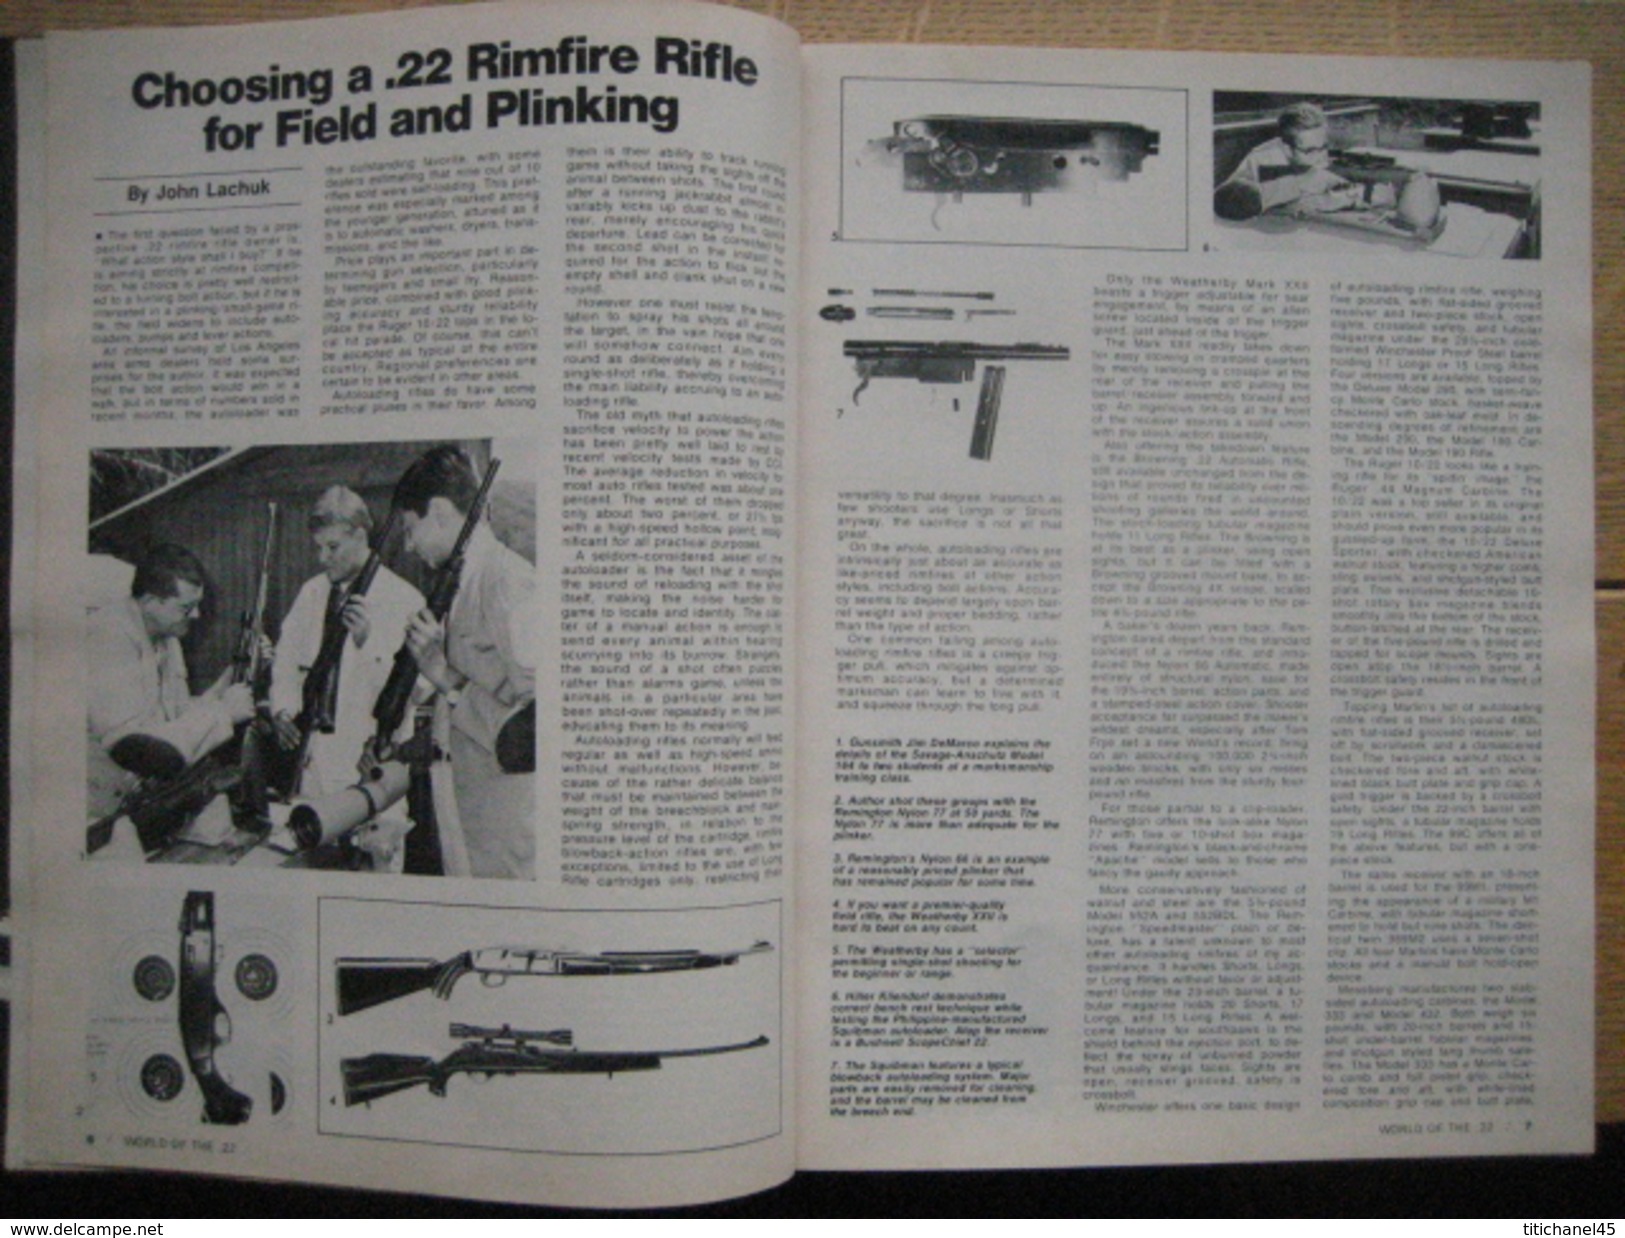 Rare WONDERFUL WORLD OF THE .22 By John LACHUK - COMPLETE CATALOGING OF .22 RIFLES AND HANDGUNS - PRICES, SPECS - United States